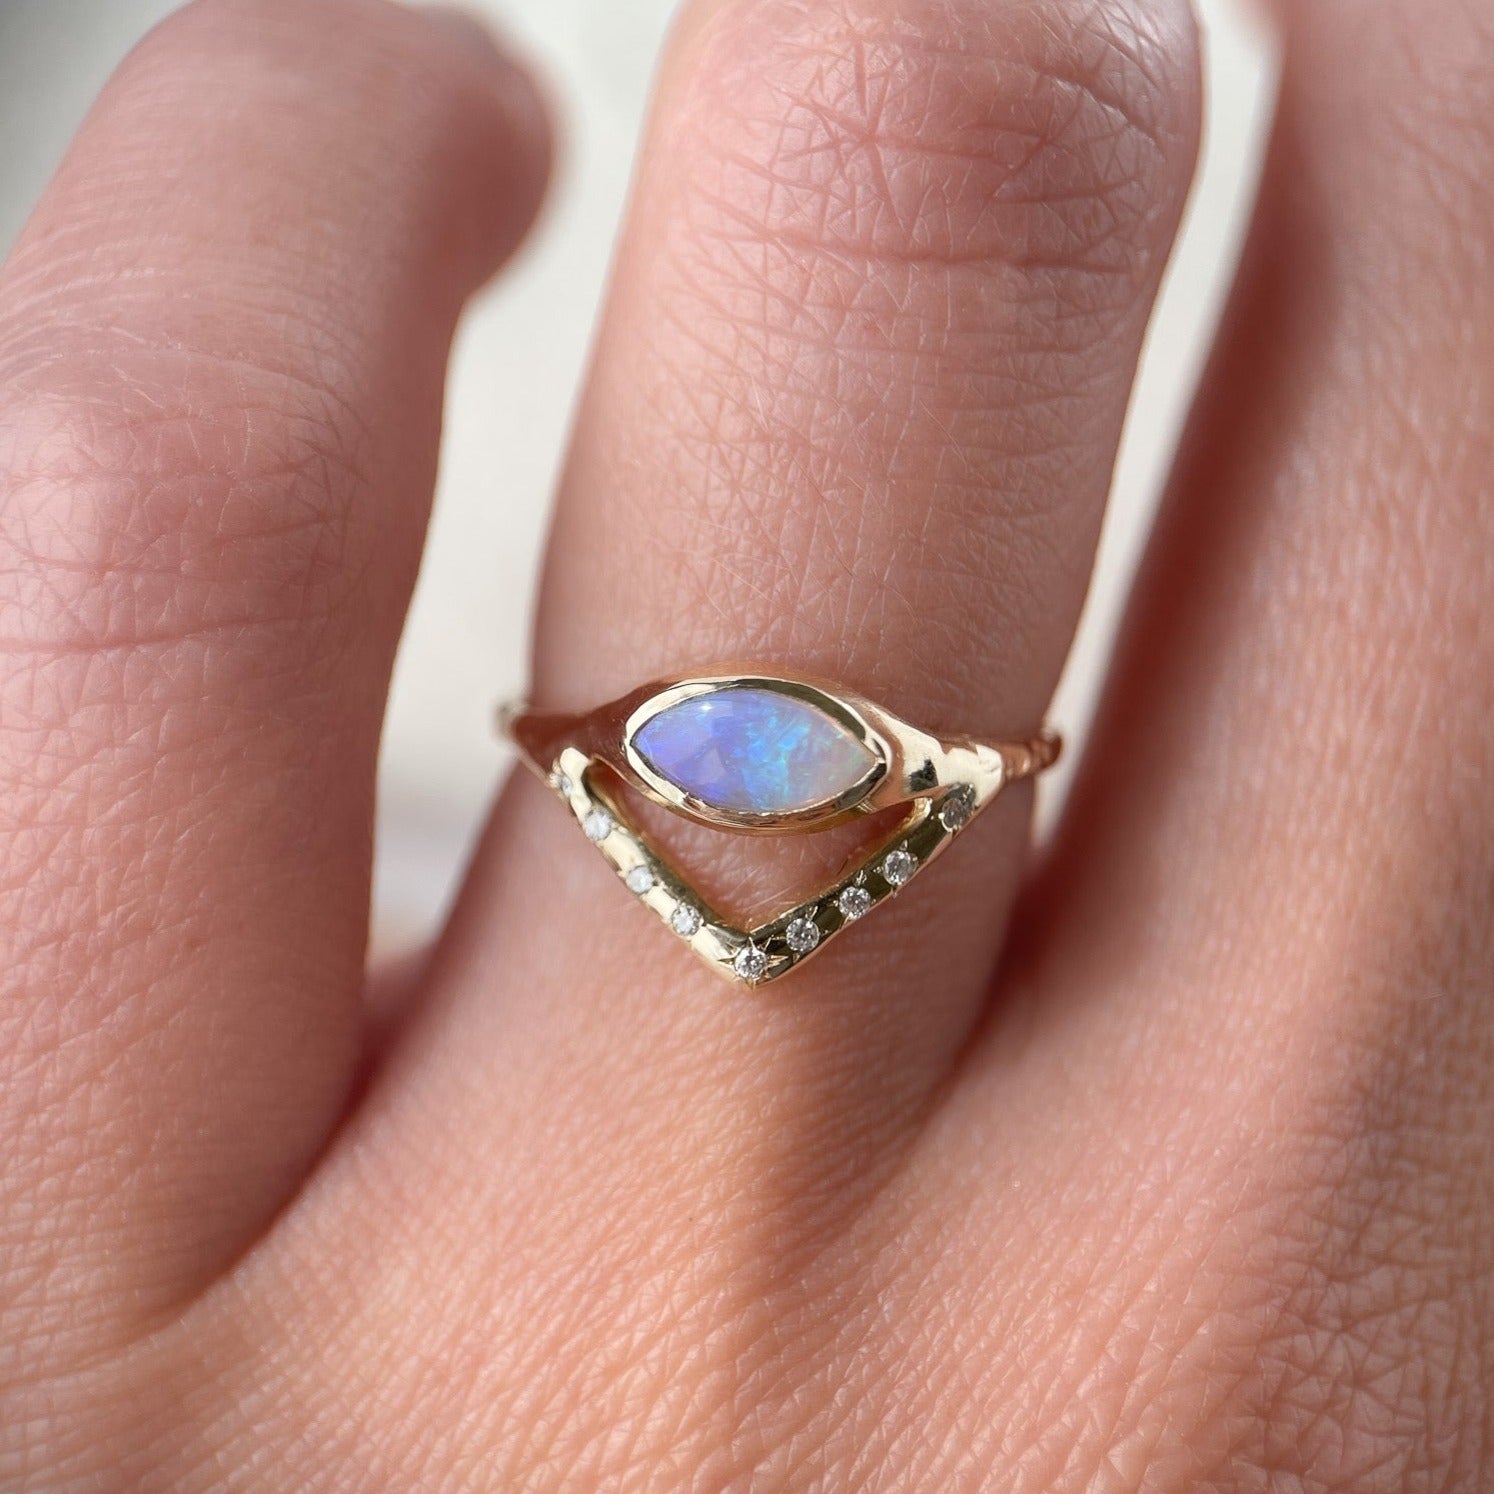 Horizontal marquise opal on a slender band with an organic diamond-set V accent, creating a stunning and unique ring design. Worn to show scale.